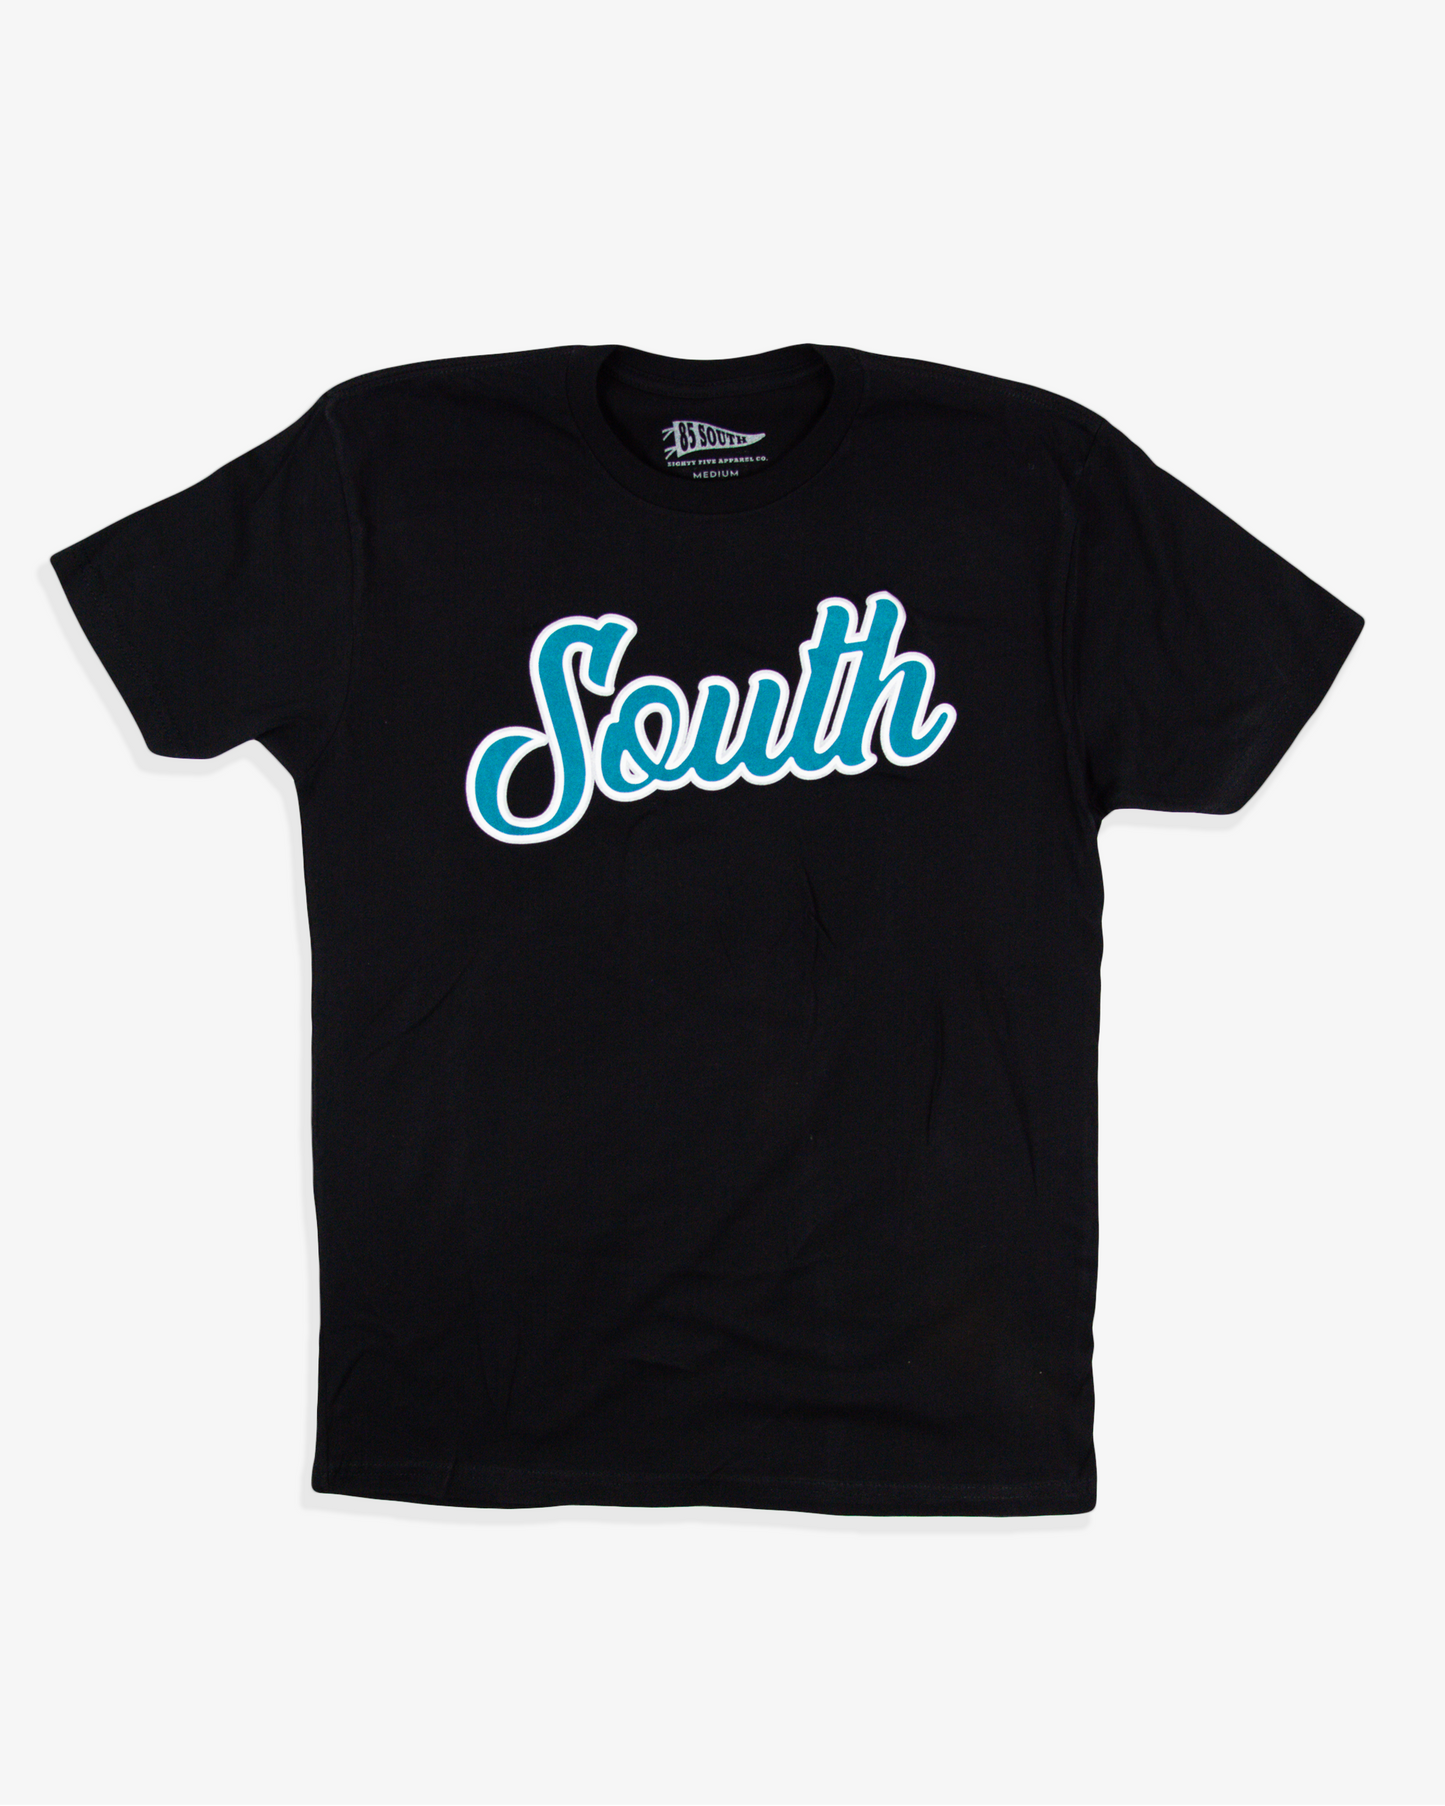 City Edition South Script Tee - Philly